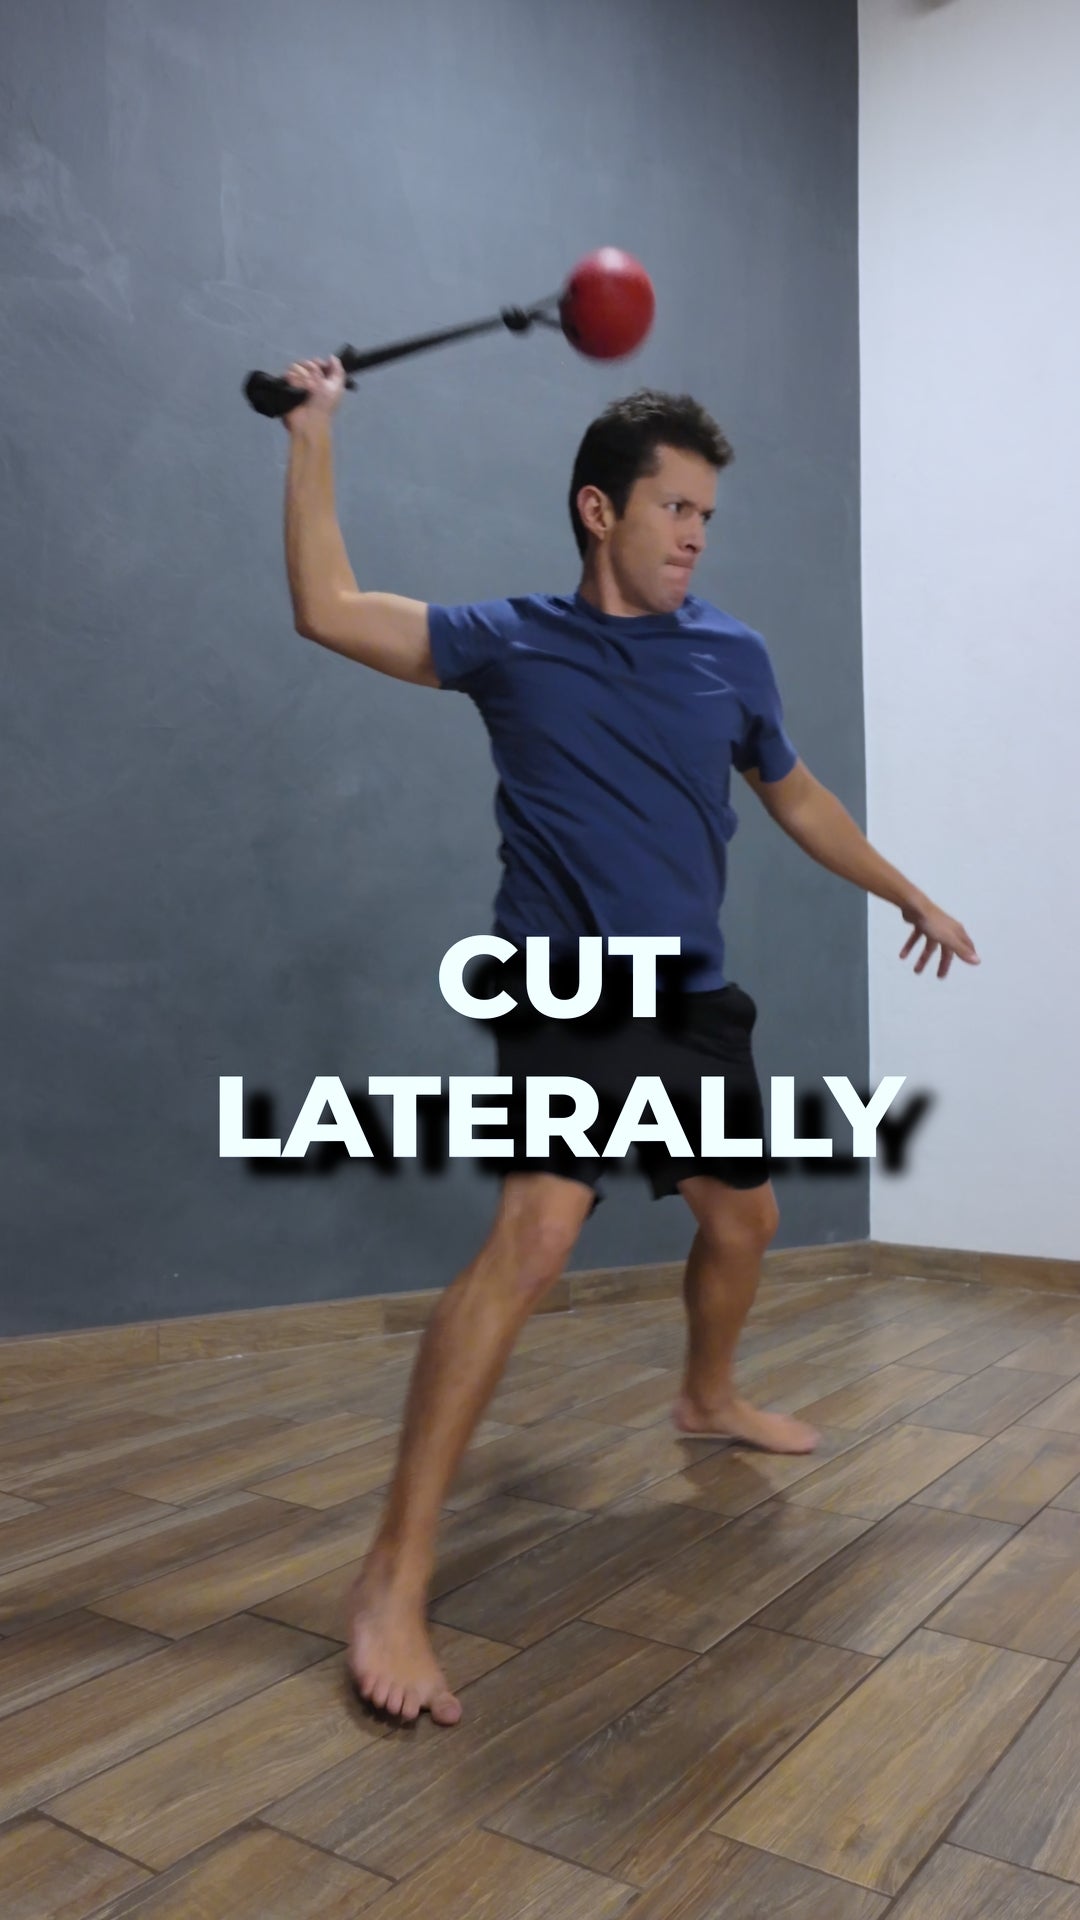 HOW TO CUT LATERALLY